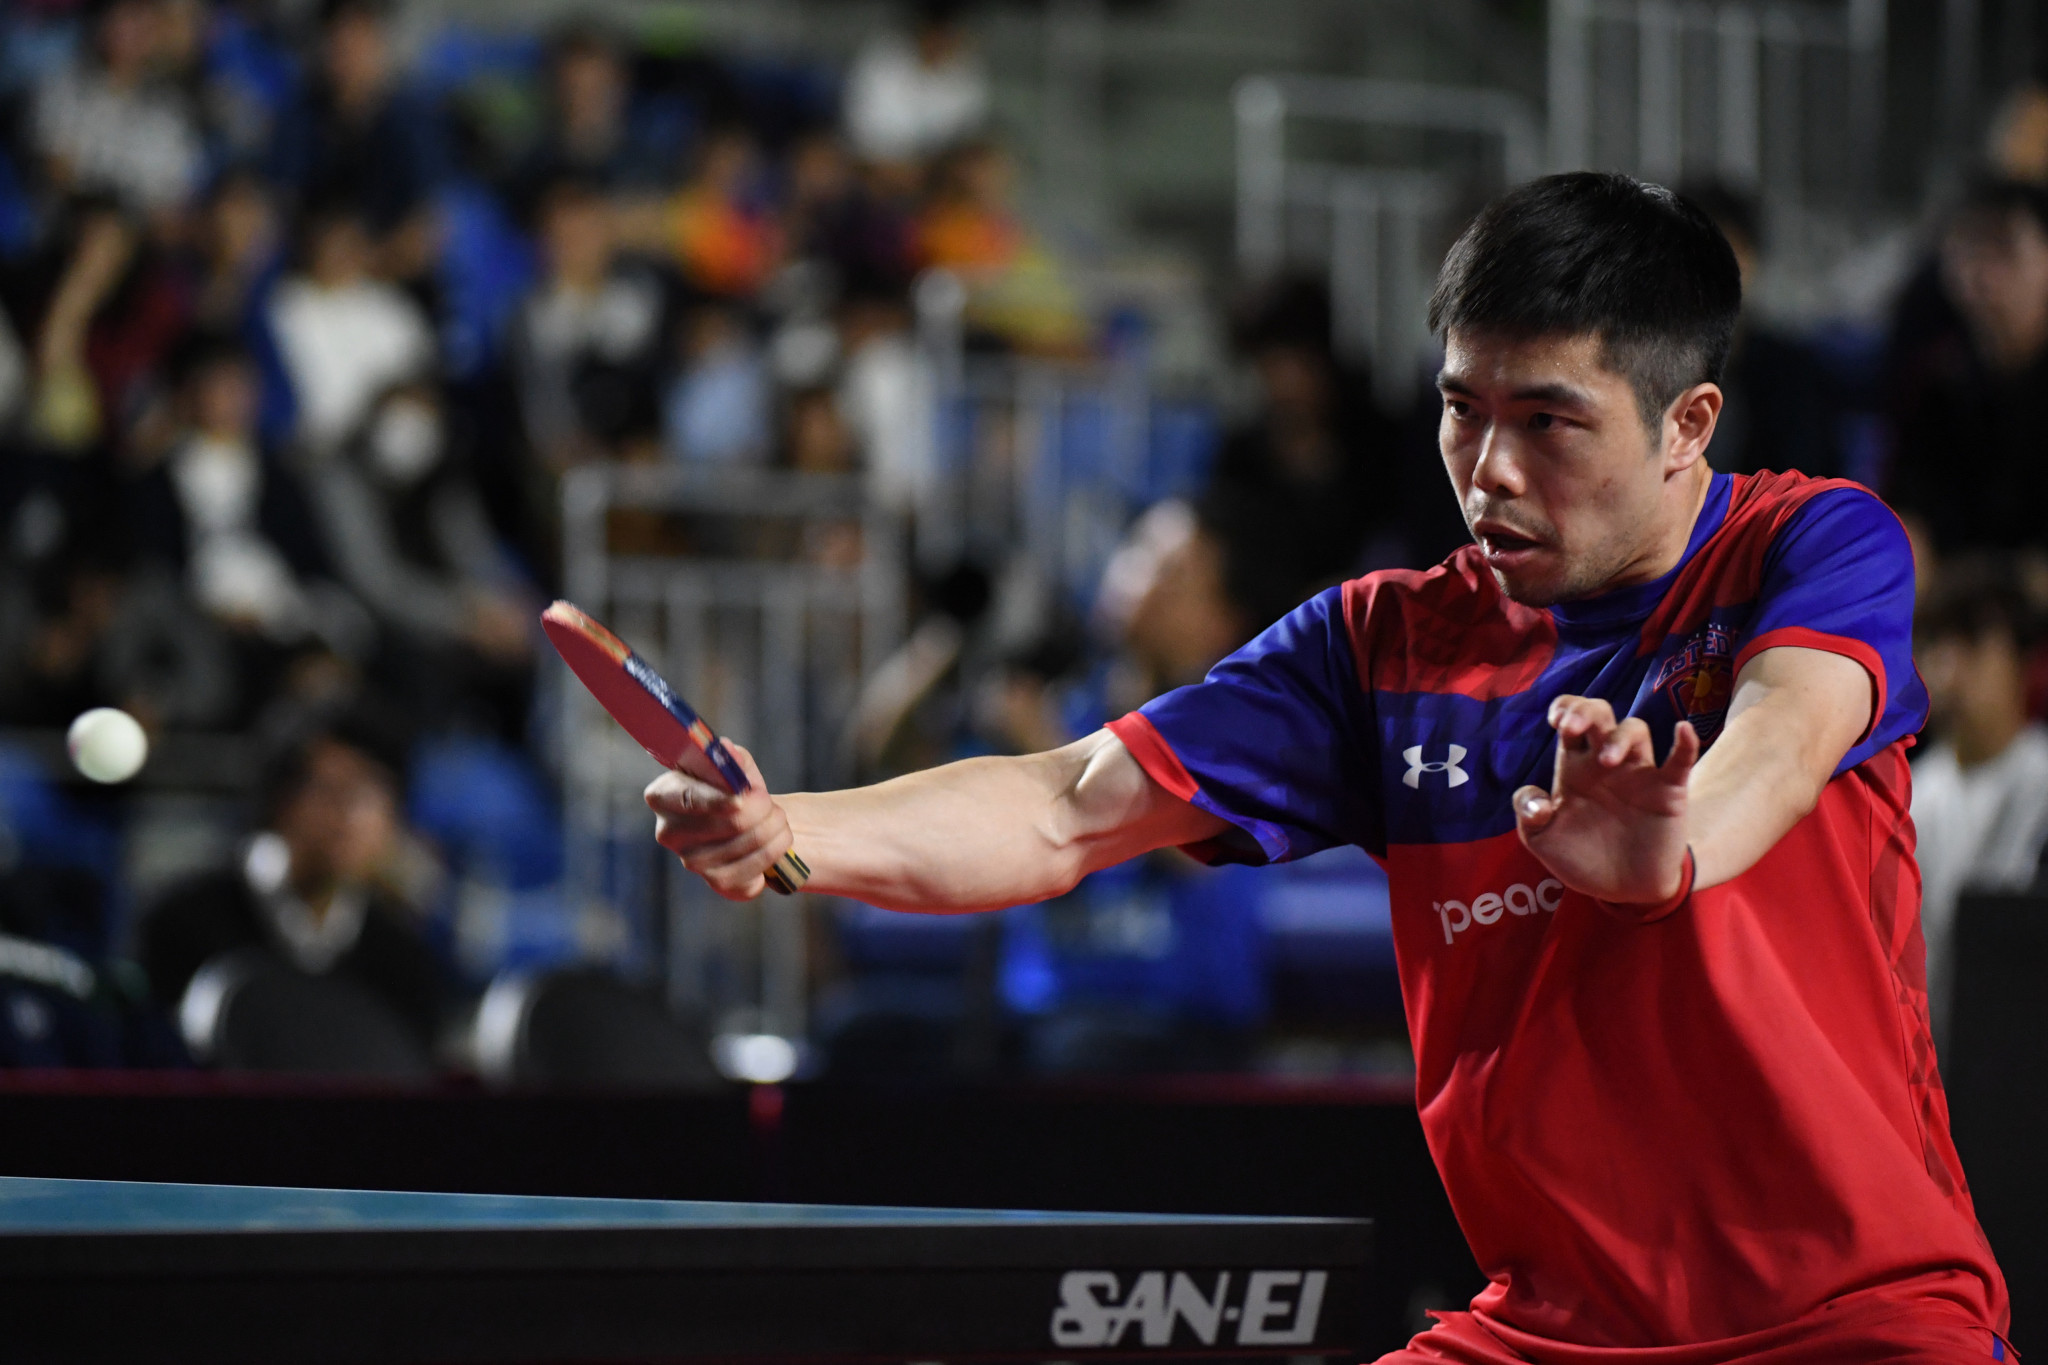 Chuang Chih-Yuan helped Chinese Taipei reach the men's team semi-final by beating Pang Yew En Koen in straight games ©Getty Images